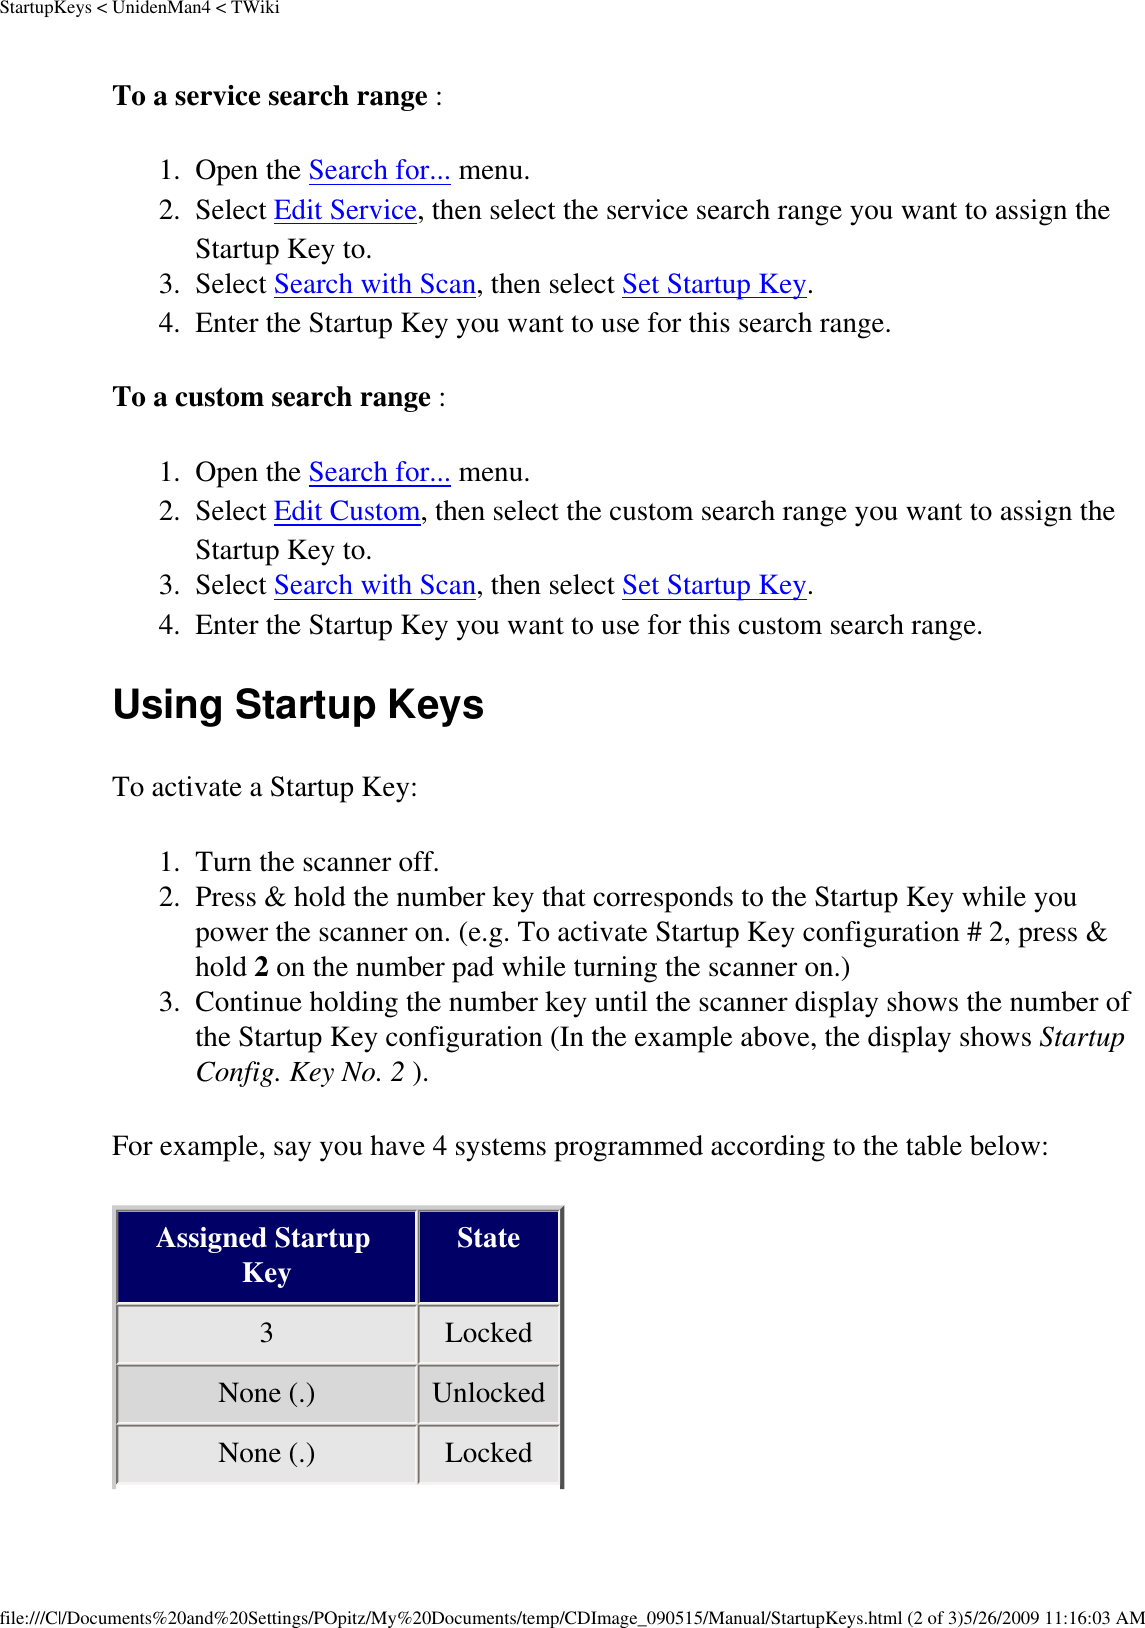 StartupKeys &lt; UnidenMan4 &lt; TWikiTo a service search range : 1.  Open the Search for... menu. 2.  Select Edit Service, then select the service search range you want to assign the Startup Key to. 3.  Select Search with Scan, then select Set Startup Key. 4.  Enter the Startup Key you want to use for this search range. To a custom search range : 1.  Open the Search for... menu. 2.  Select Edit Custom, then select the custom search range you want to assign the Startup Key to. 3.  Select Search with Scan, then select Set Startup Key. 4.  Enter the Startup Key you want to use for this custom search range. Using Startup Keys To activate a Startup Key: 1.  Turn the scanner off. 2.  Press &amp; hold the number key that corresponds to the Startup Key while you power the scanner on. (e.g. To activate Startup Key configuration # 2, press &amp; hold 2 on the number pad while turning the scanner on.) 3.  Continue holding the number key until the scanner display shows the number of the Startup Key configuration (In the example above, the display shows Startup Config. Key No. 2 ). For example, say you have 4 systems programmed according to the table below: Assigned Startup Key State 3  Locked None (.)  Unlocked None (.)  Locked file:///C|/Documents%20and%20Settings/POpitz/My%20Documents/temp/CDImage_090515/Manual/StartupKeys.html (2 of 3)5/26/2009 11:16:03 AM